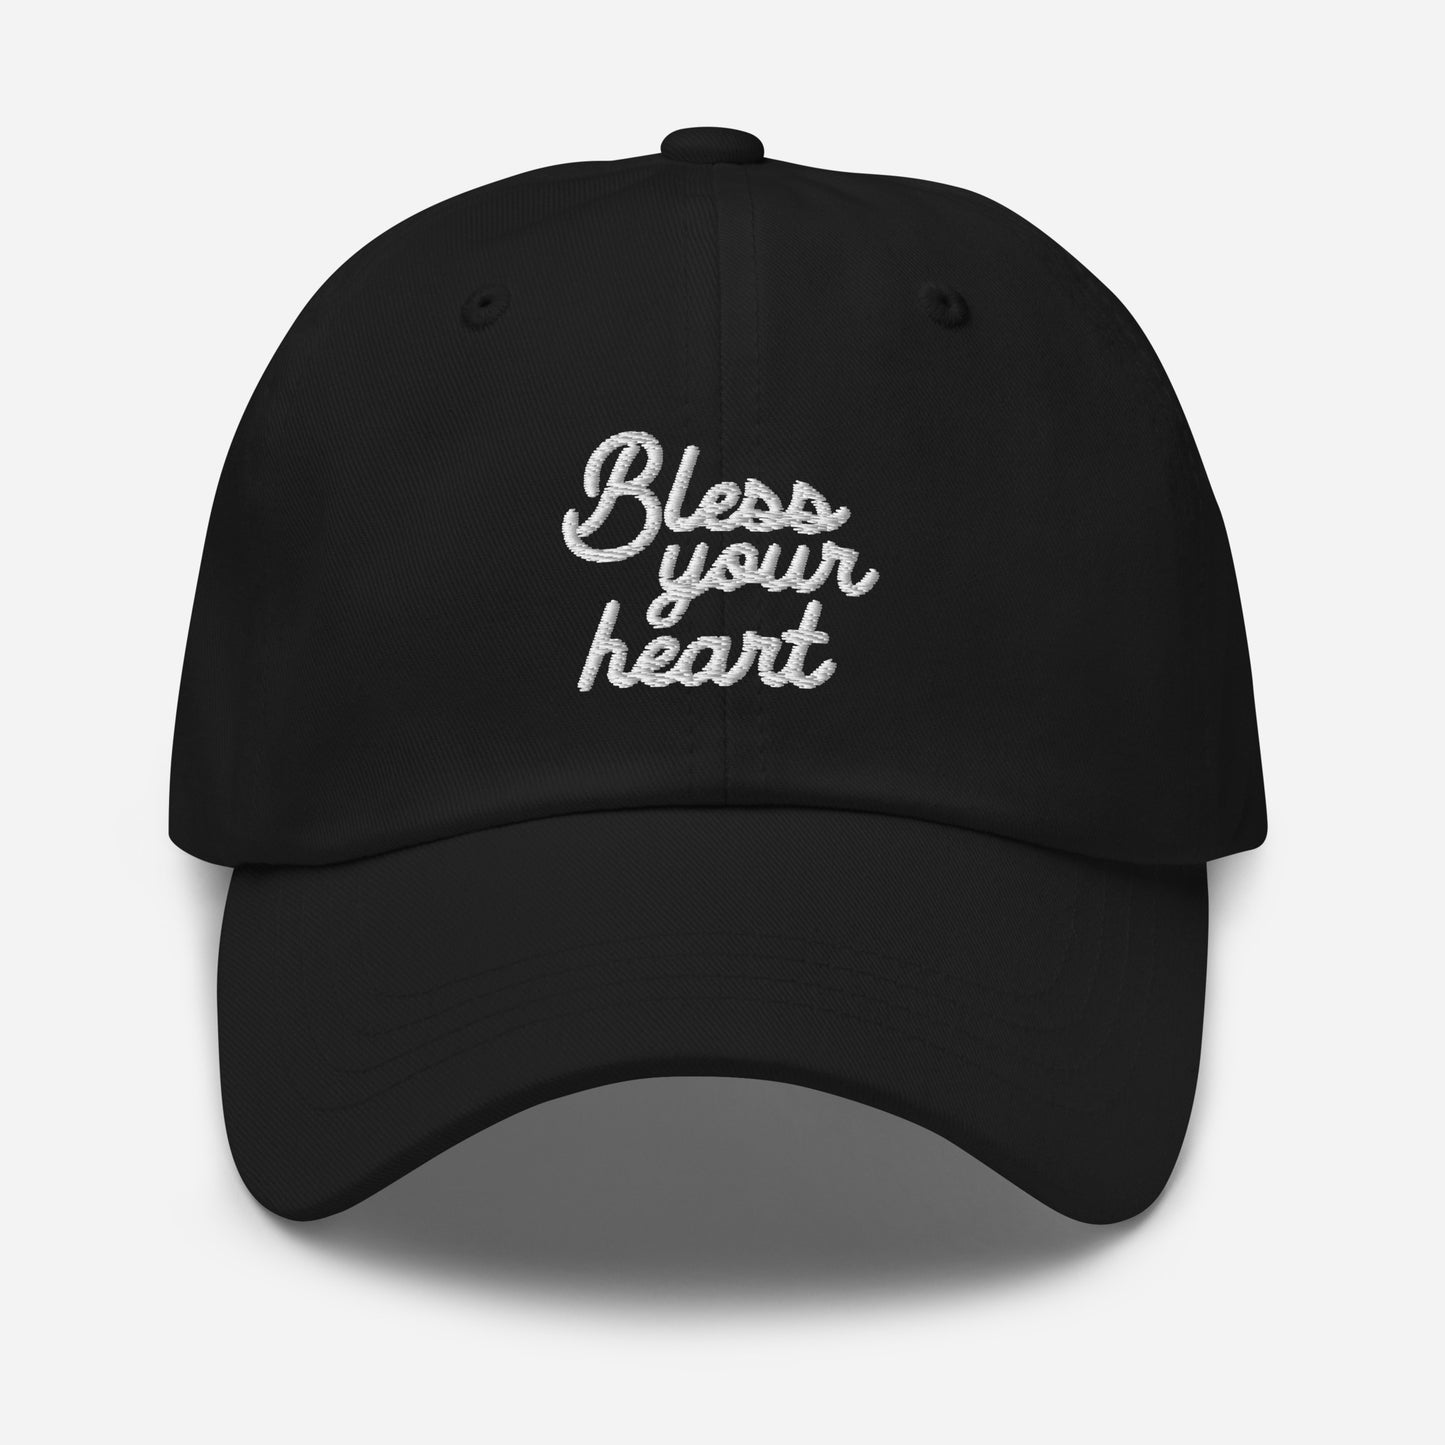 Bless Your Heart Dad hat